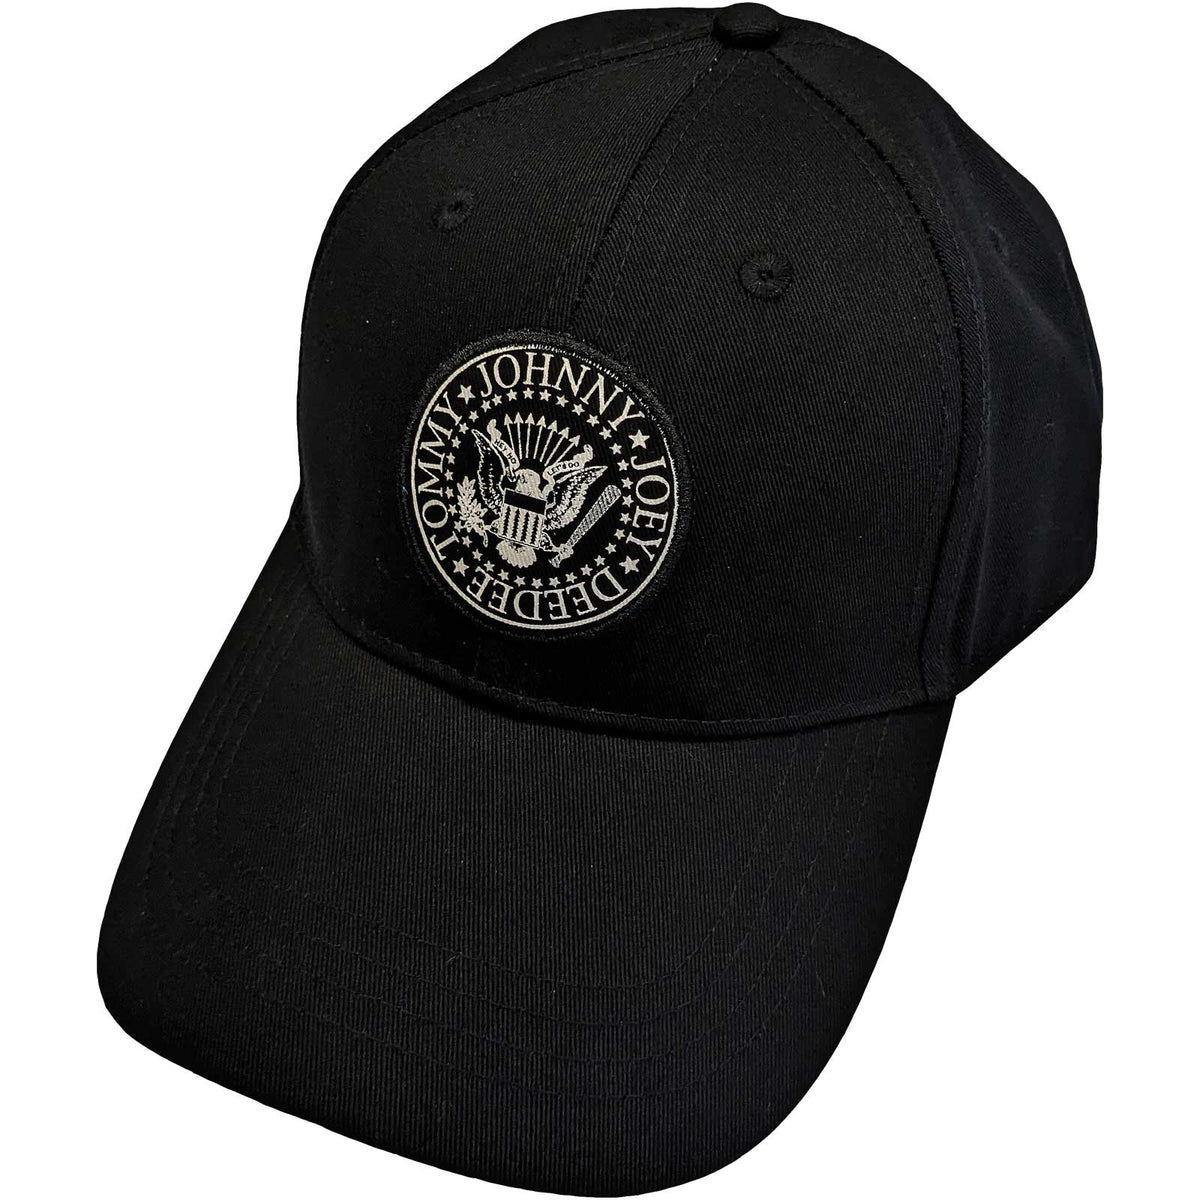 Ramones Unisex Baseball Cap - Presidential Seal - Official Product